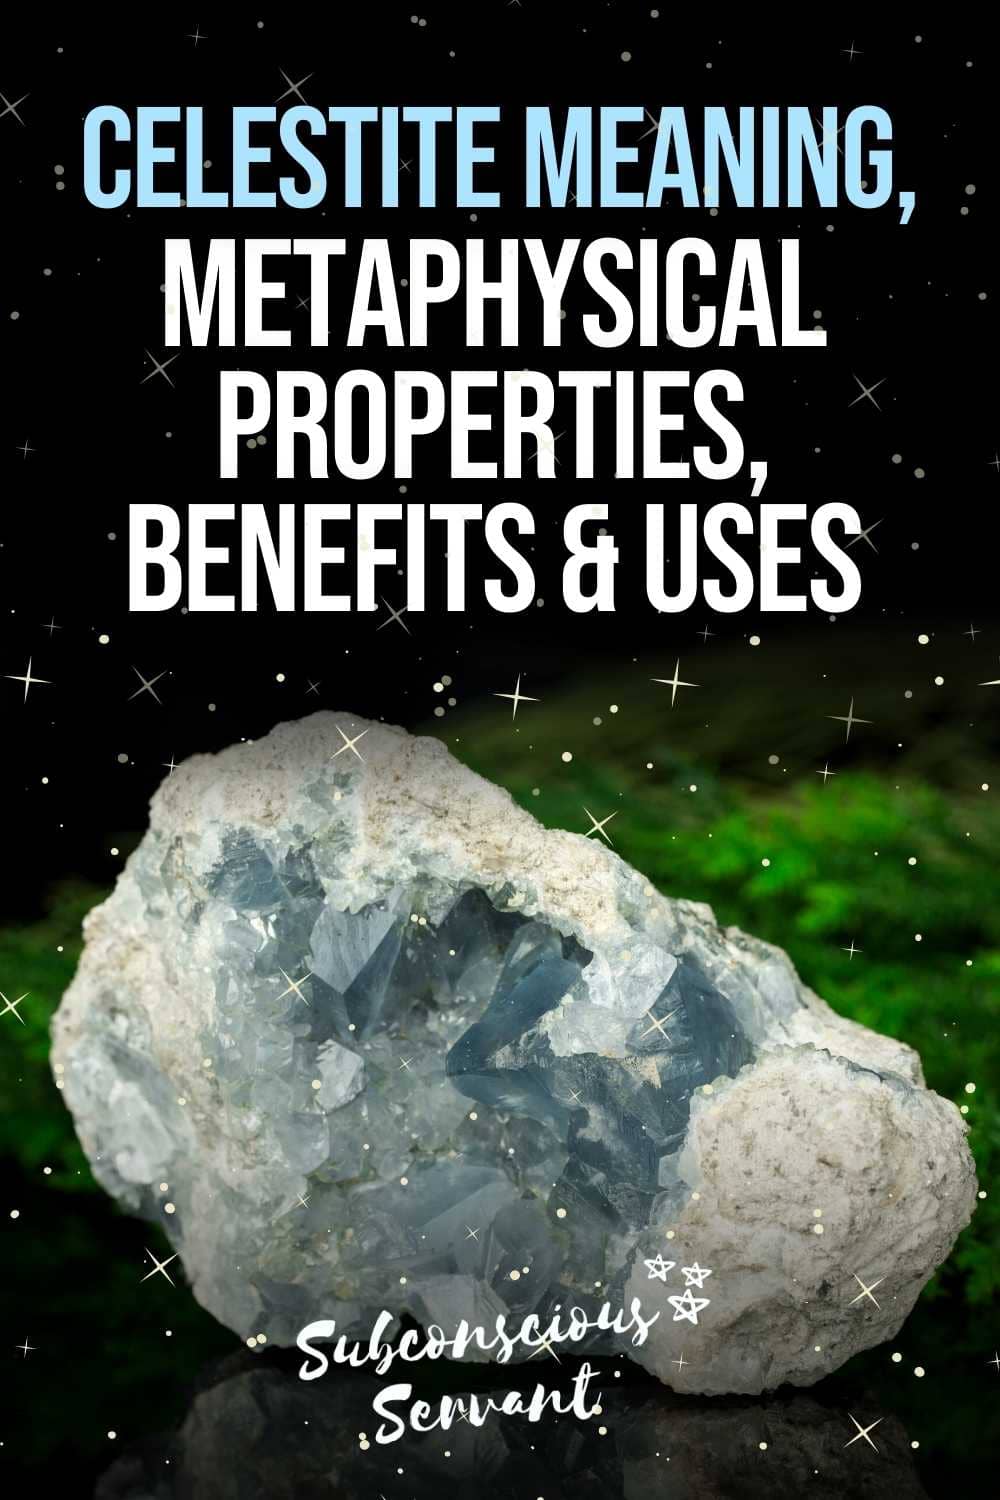 Amazing Celestite Meanings, Metaphysical Properties & Benefits